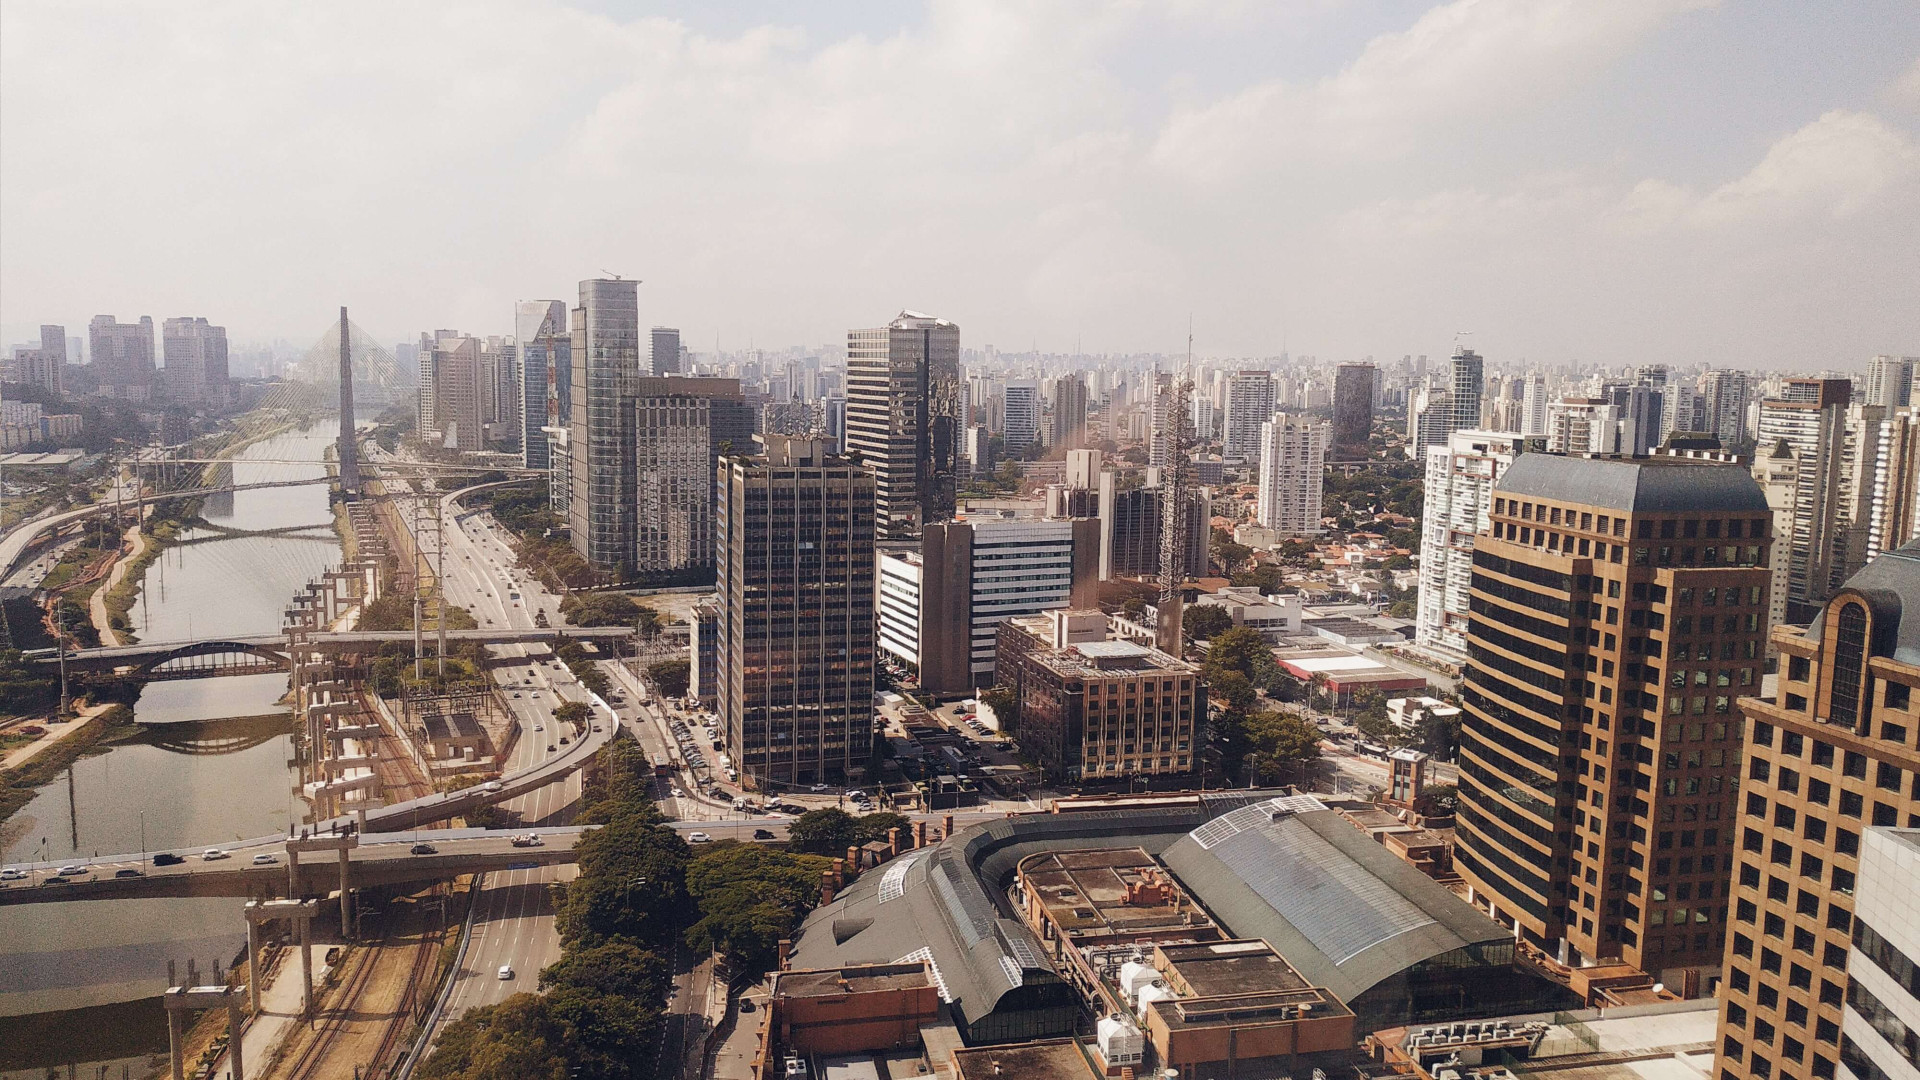 14 neighbors in Sao Paulo want to know and live there forever (Image: Unsplash)